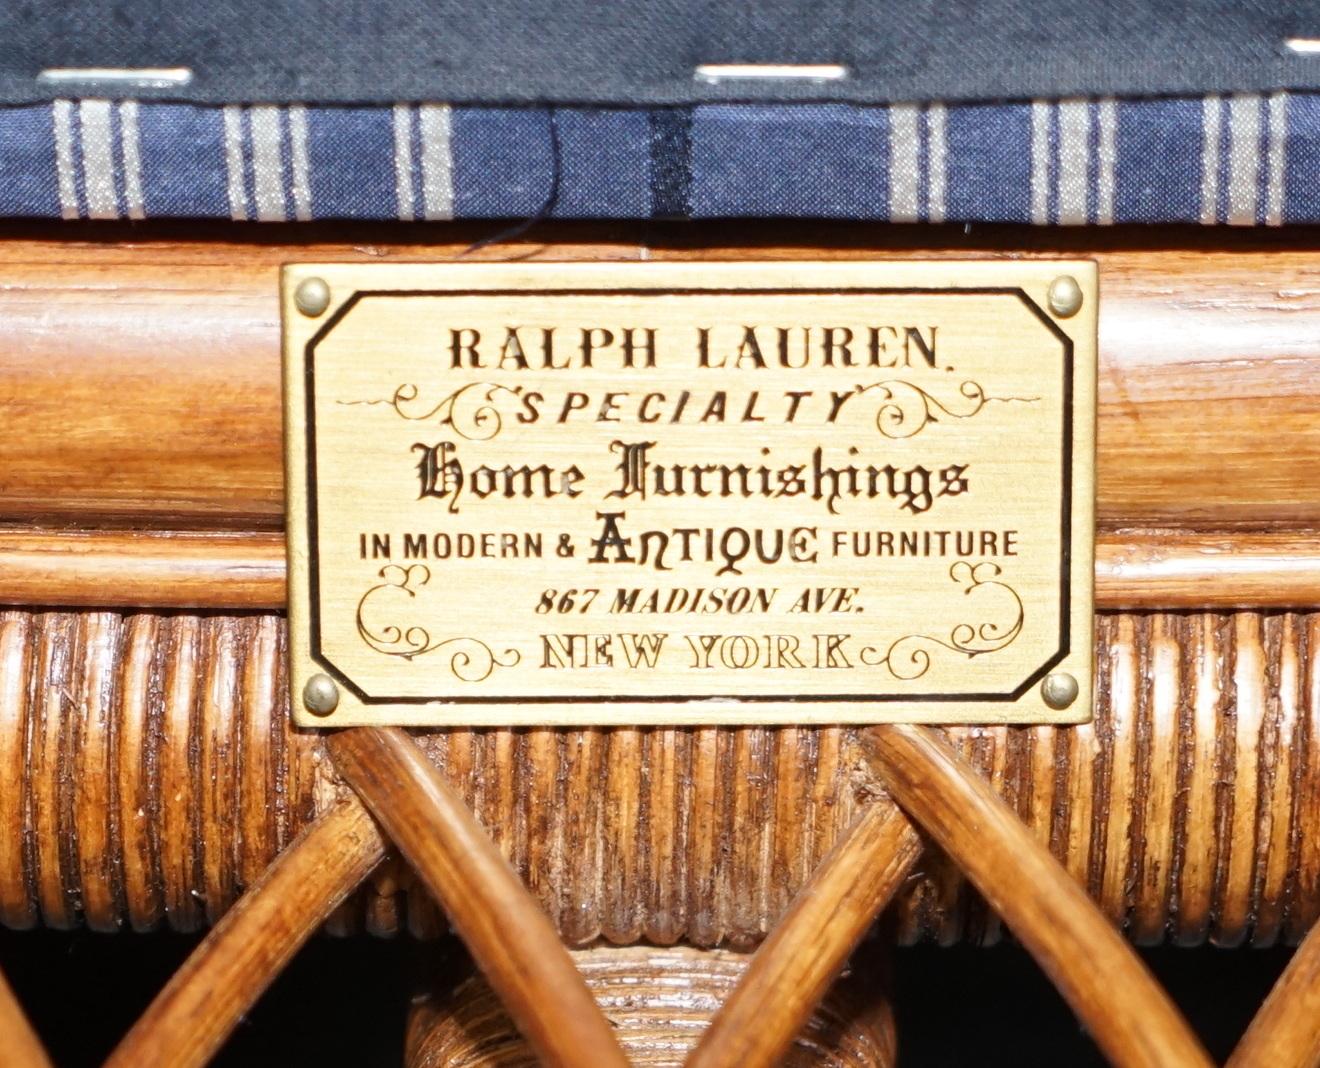 Ralph Lauren Speciality 867 Madison Ave Nyc Bergere Wicker Armchair 7